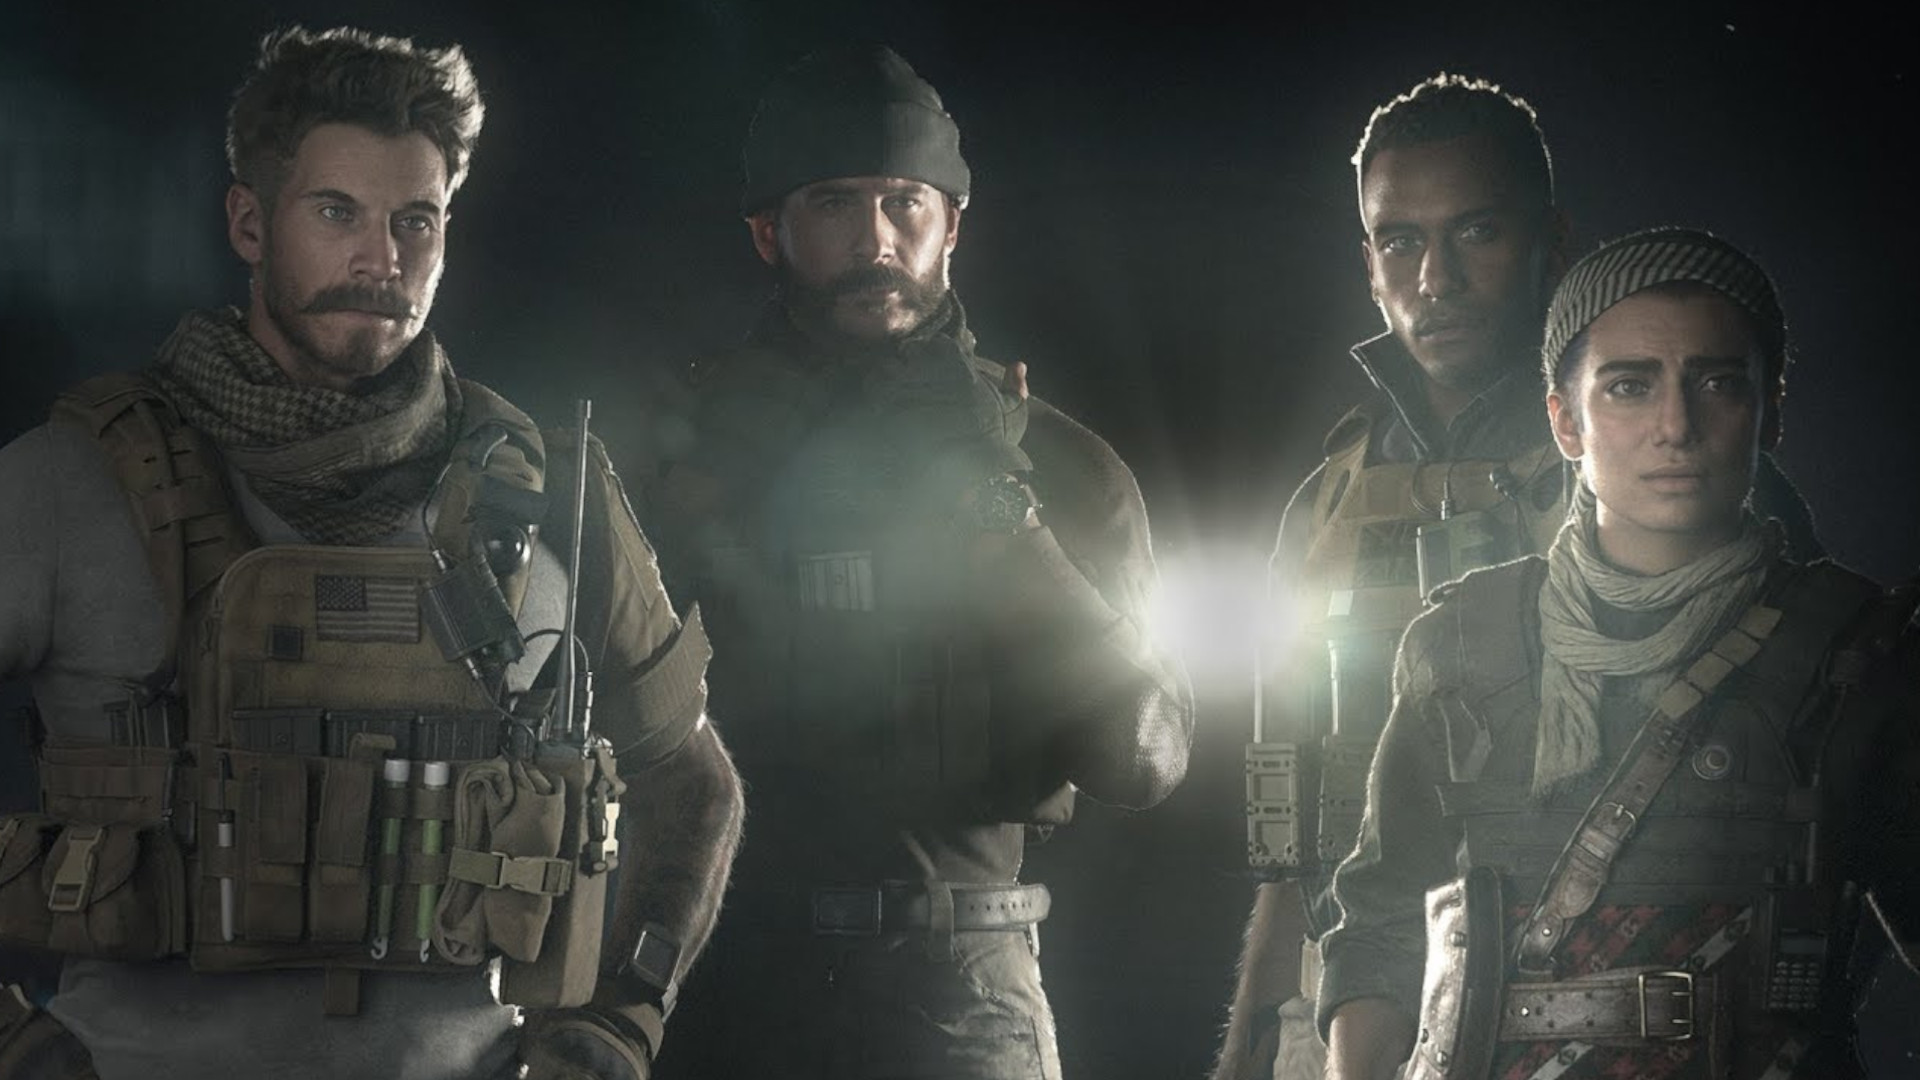 2023 will reportedly be the first year without a new Call of Duty since 2004